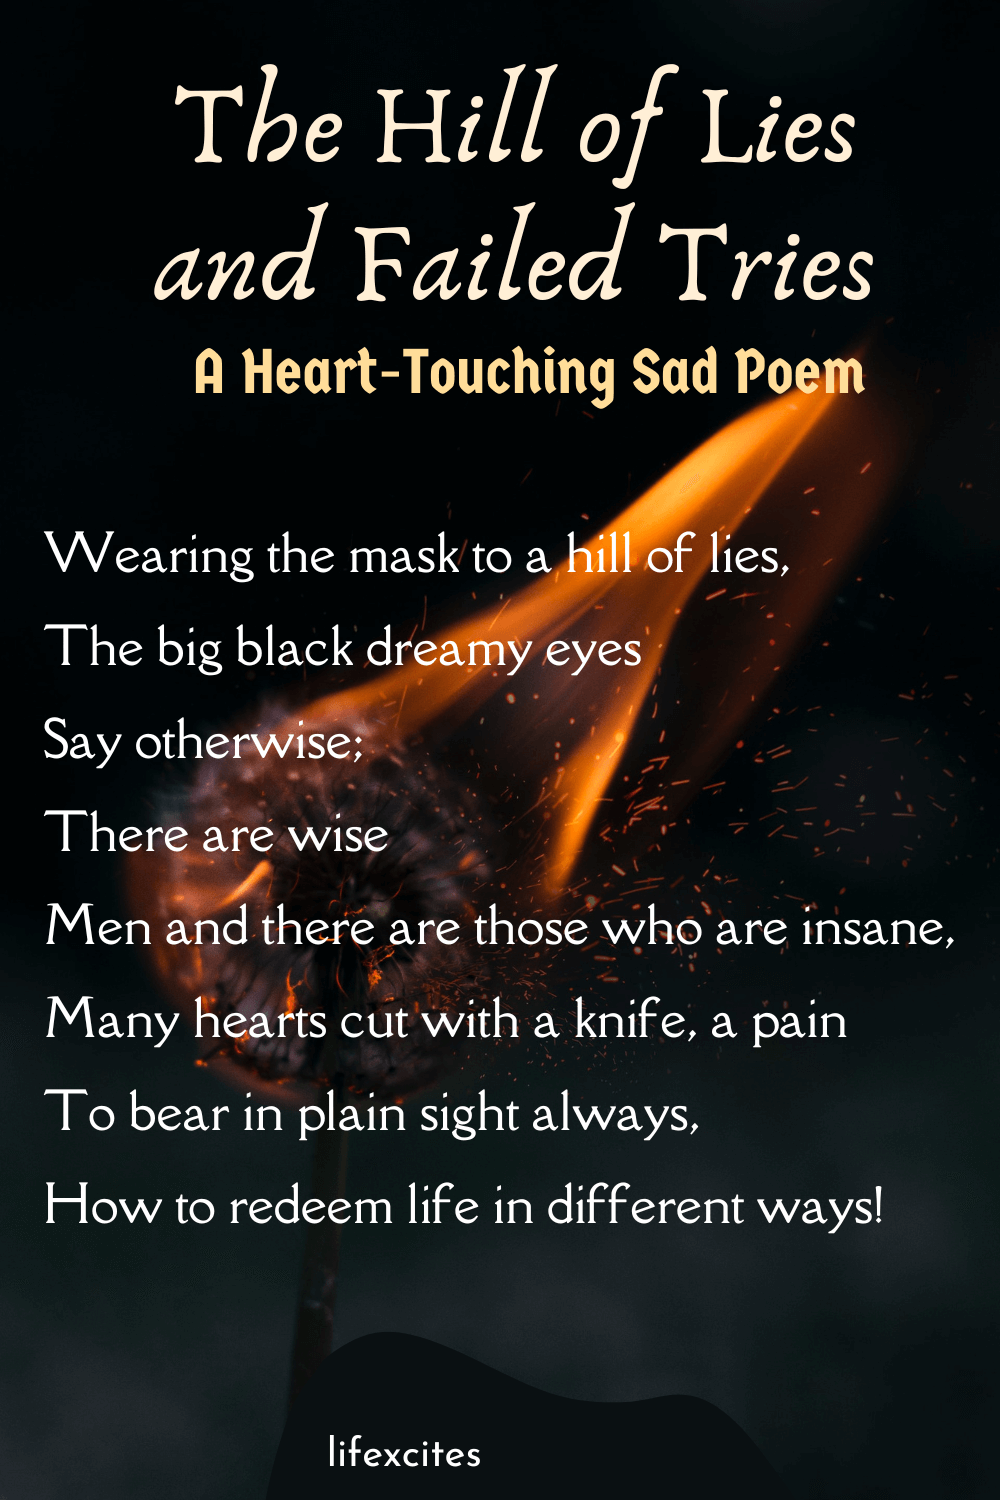 The Hill of Lies and Failed Tries – A Heart-Touching Sad Poem